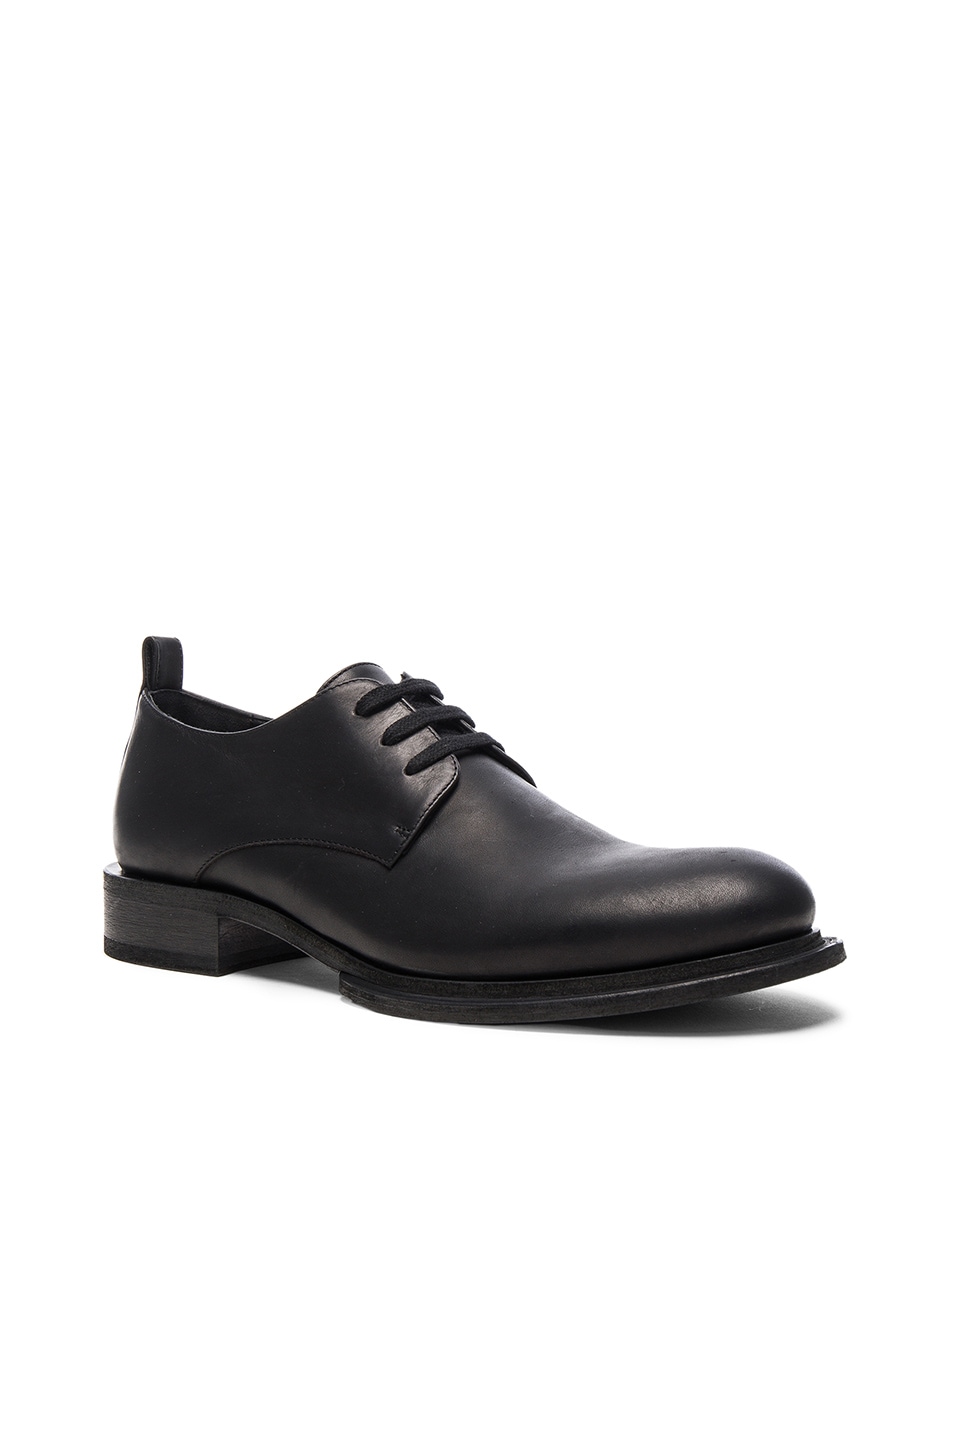 Image 1 of Ann Demeulemeester Leather Dress Shoes in Black